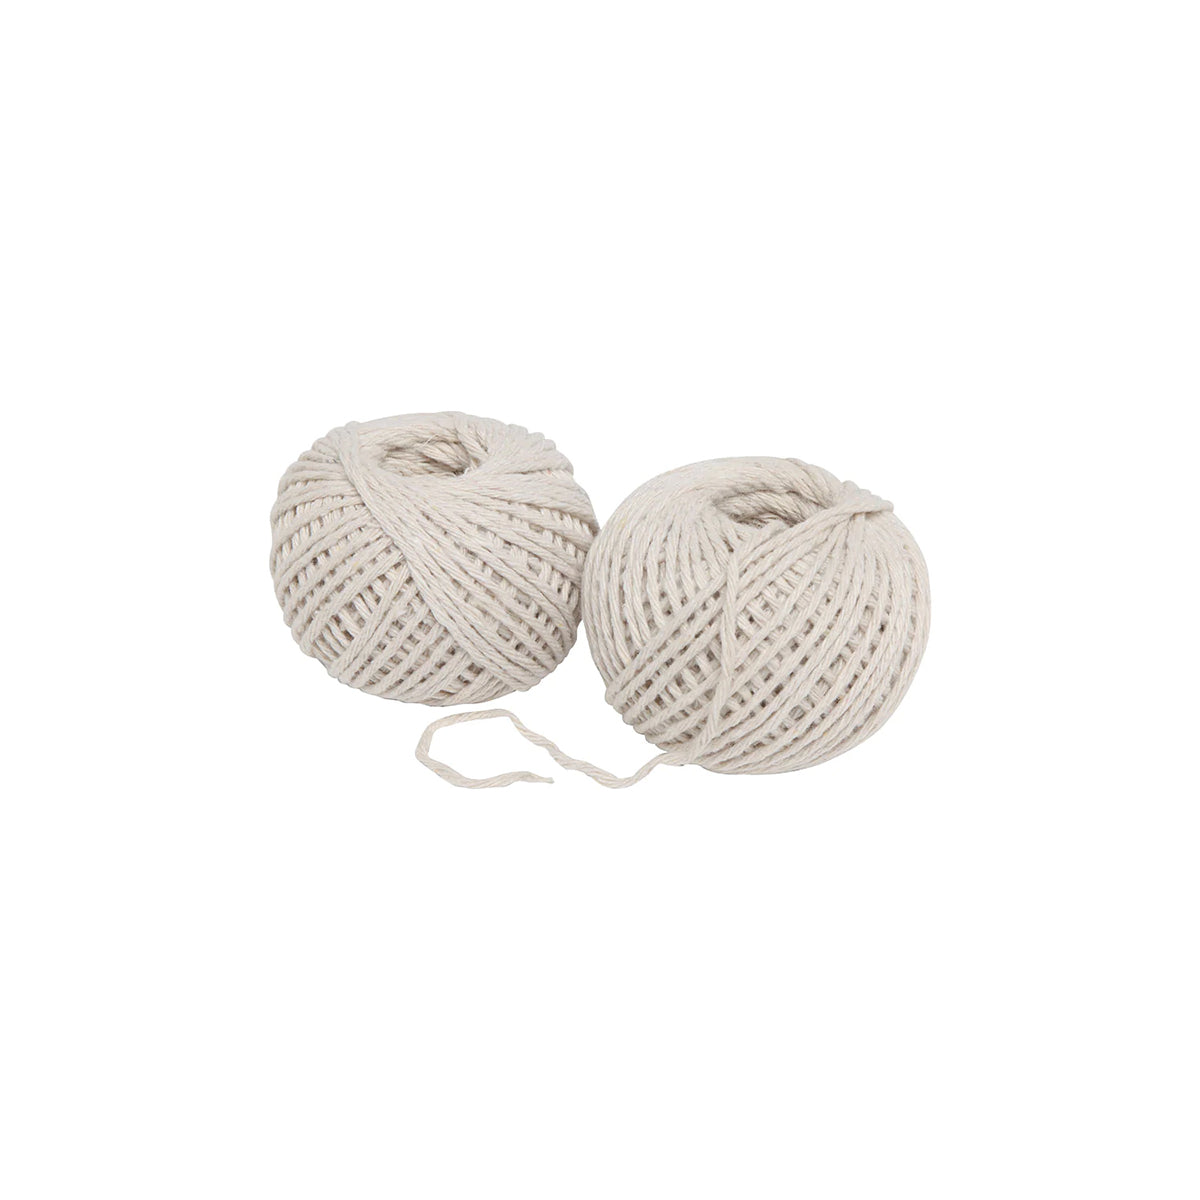 WLT43772 Wiltshire Kitchen Twine Pack Of 2  Tomkin Australia Hospitality Supplies